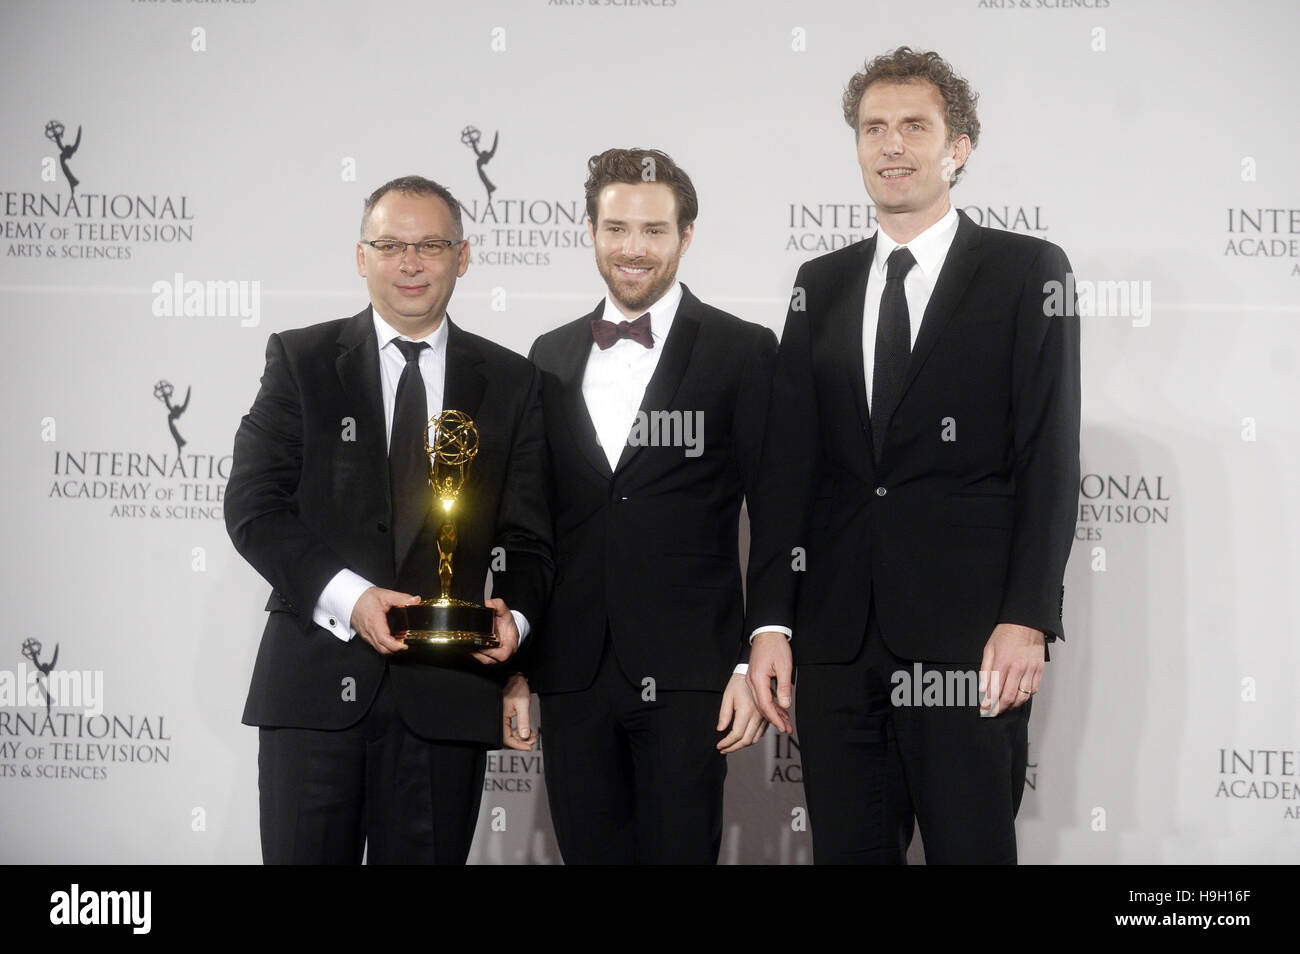 New York City. 21st Nov, 2016. Derek Wax, Ben Rappaport and Euros Lyn pose with the TV Movie/Mini-Series award in the press room during the 44th International Emmy Awards at New York Hilton on November 21, 2016 in New York City. | Verwendung weltweit © dpa/Alamy Live News Stock Photo